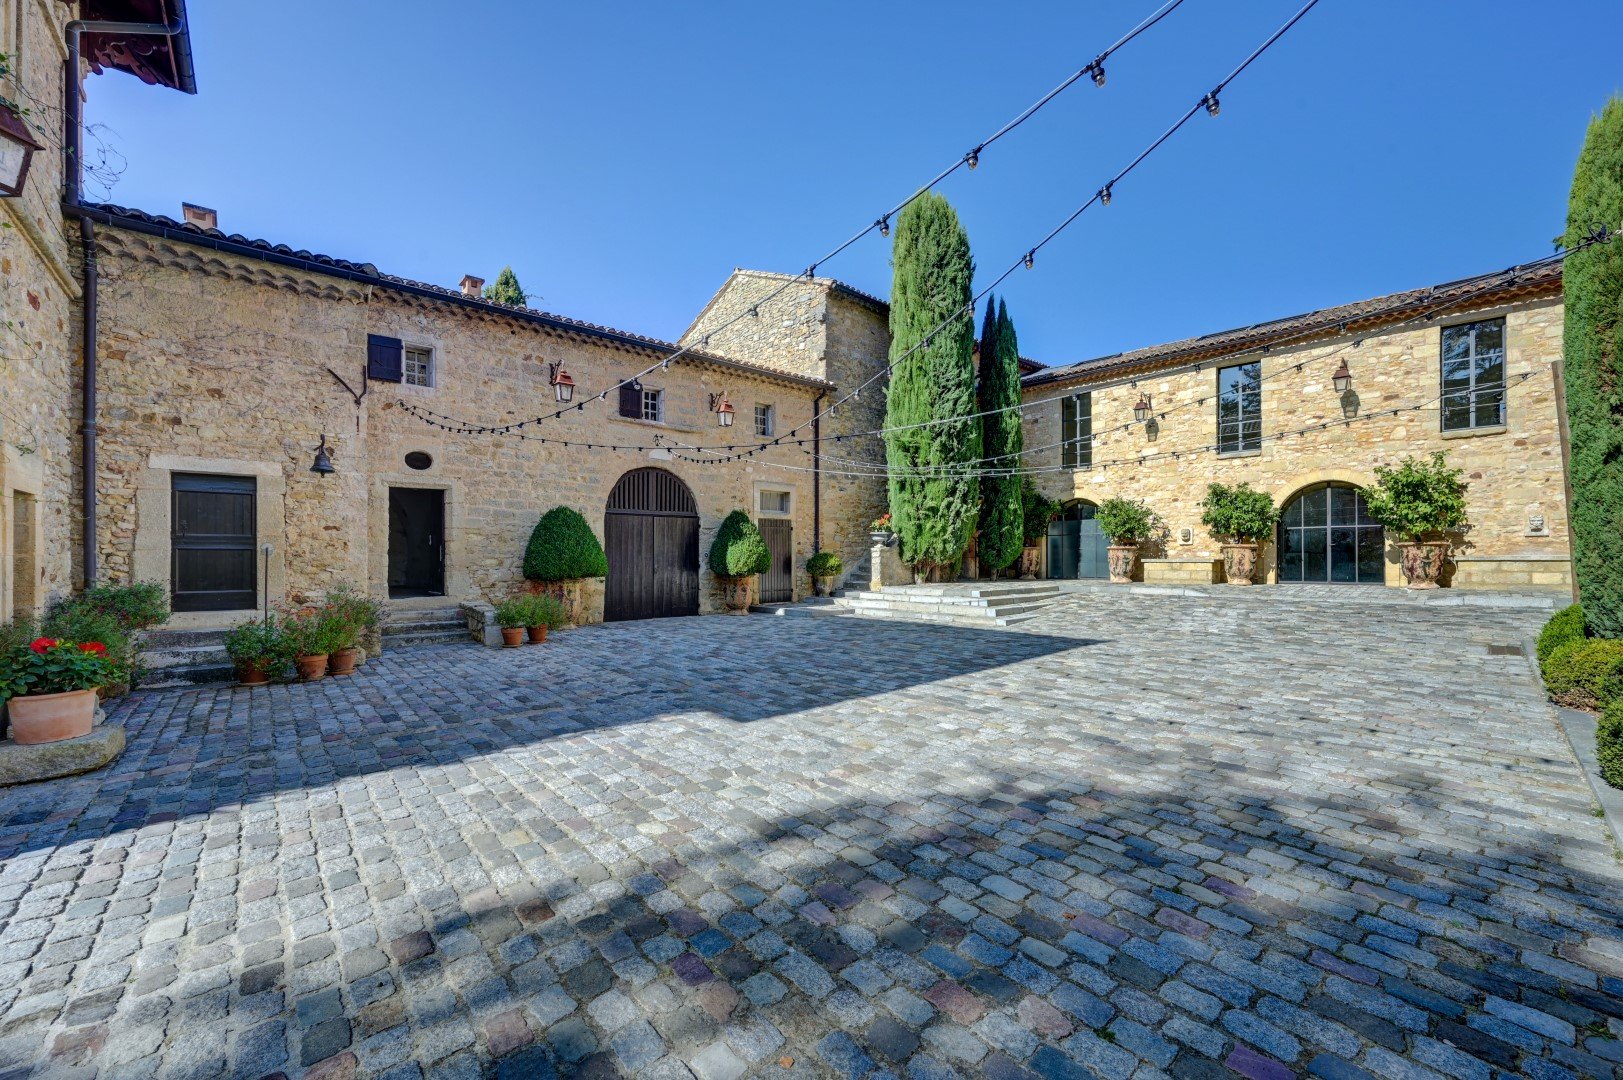 Luxury chateau for rent in the South of France at Uzes